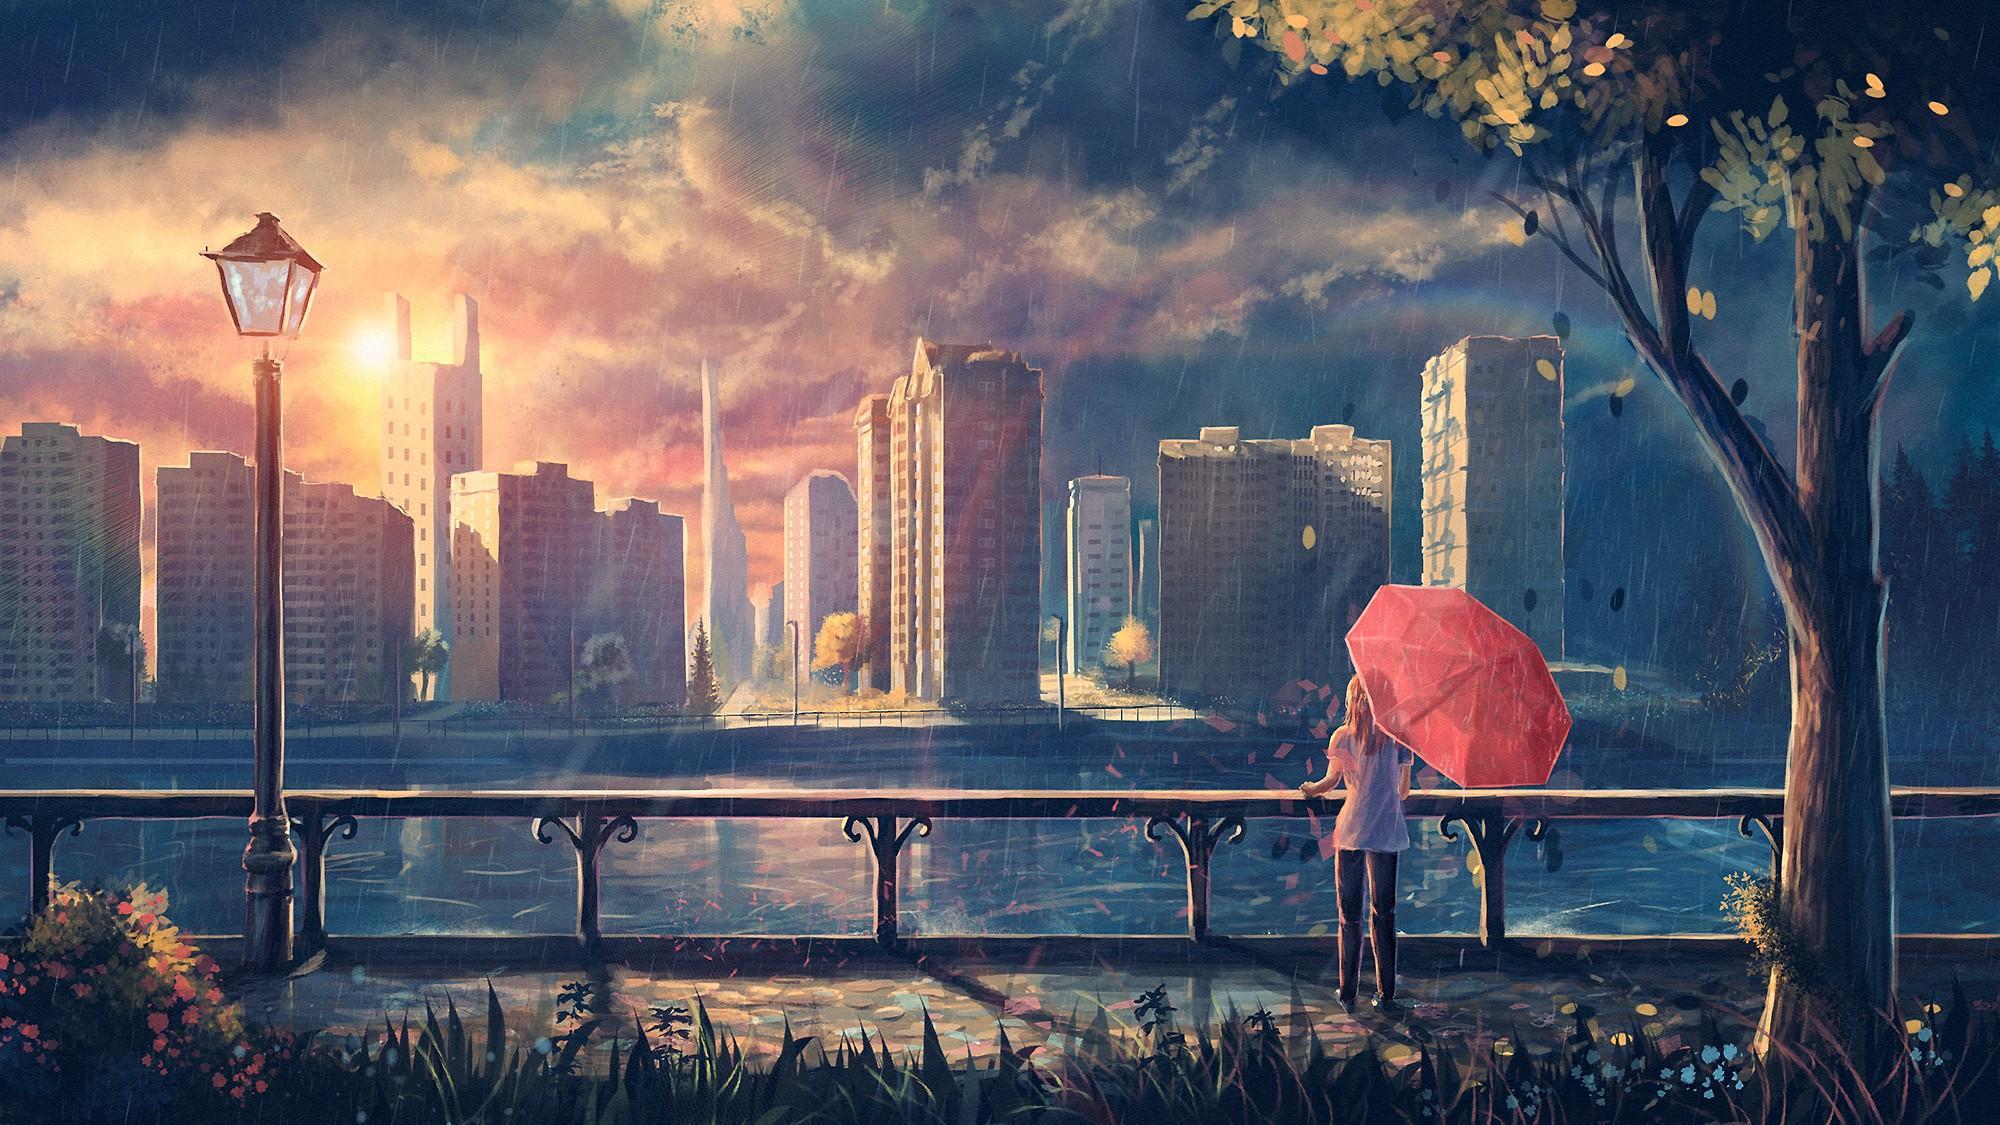 Girl In The Rainy Evening Live Wallpaper